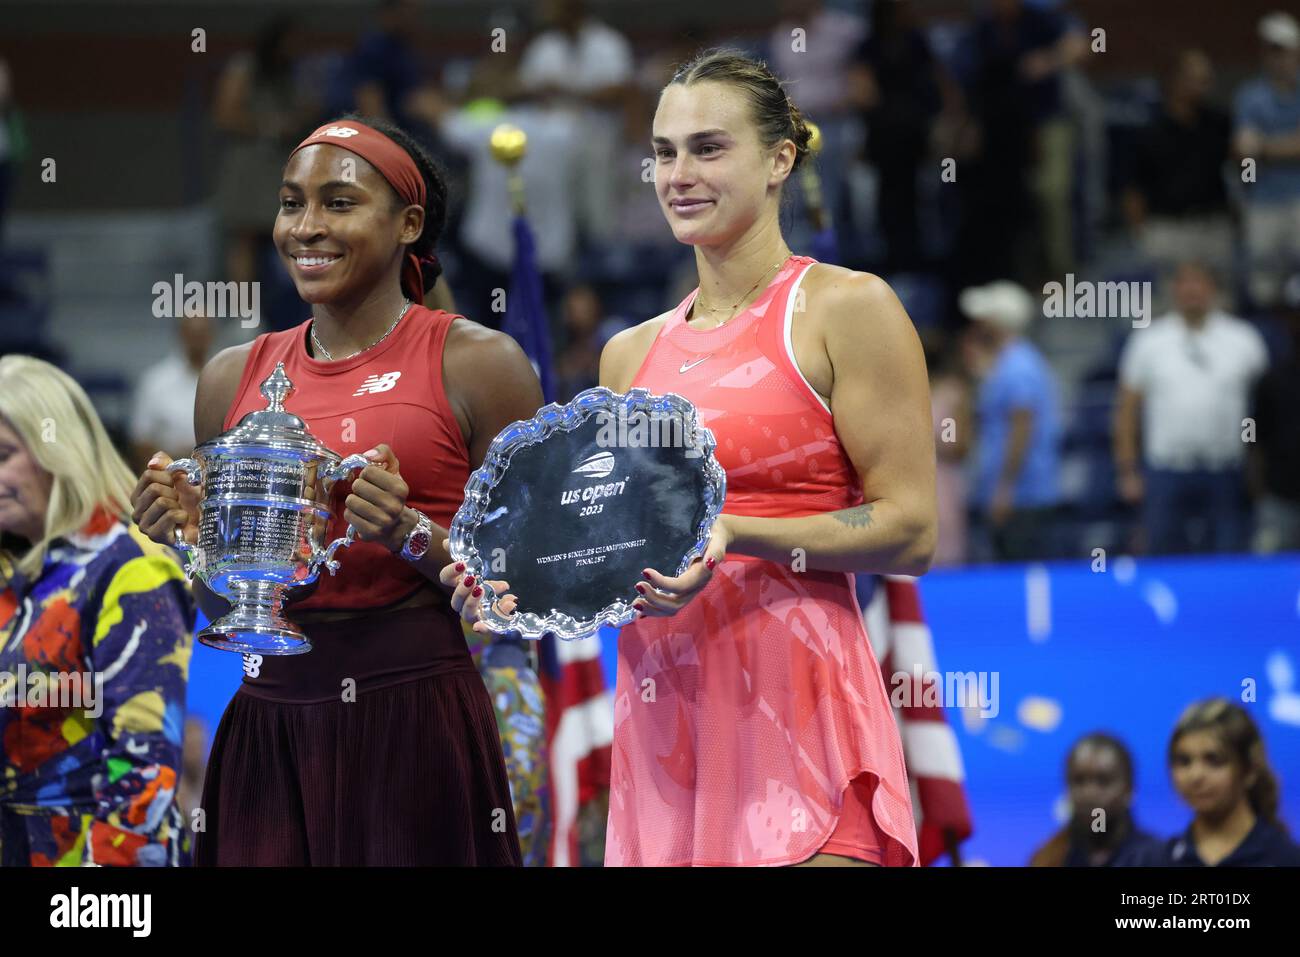 New York, United States. 09th Sep, 2023. Coco Gauff with the US Open trophy after defeating Ayrna Sabalenka, with runner up plate here, in the women's final to claim the US Open title and her first grand slam victory. Credit: Adam Stoltman/Alamy Live News Stock Photo